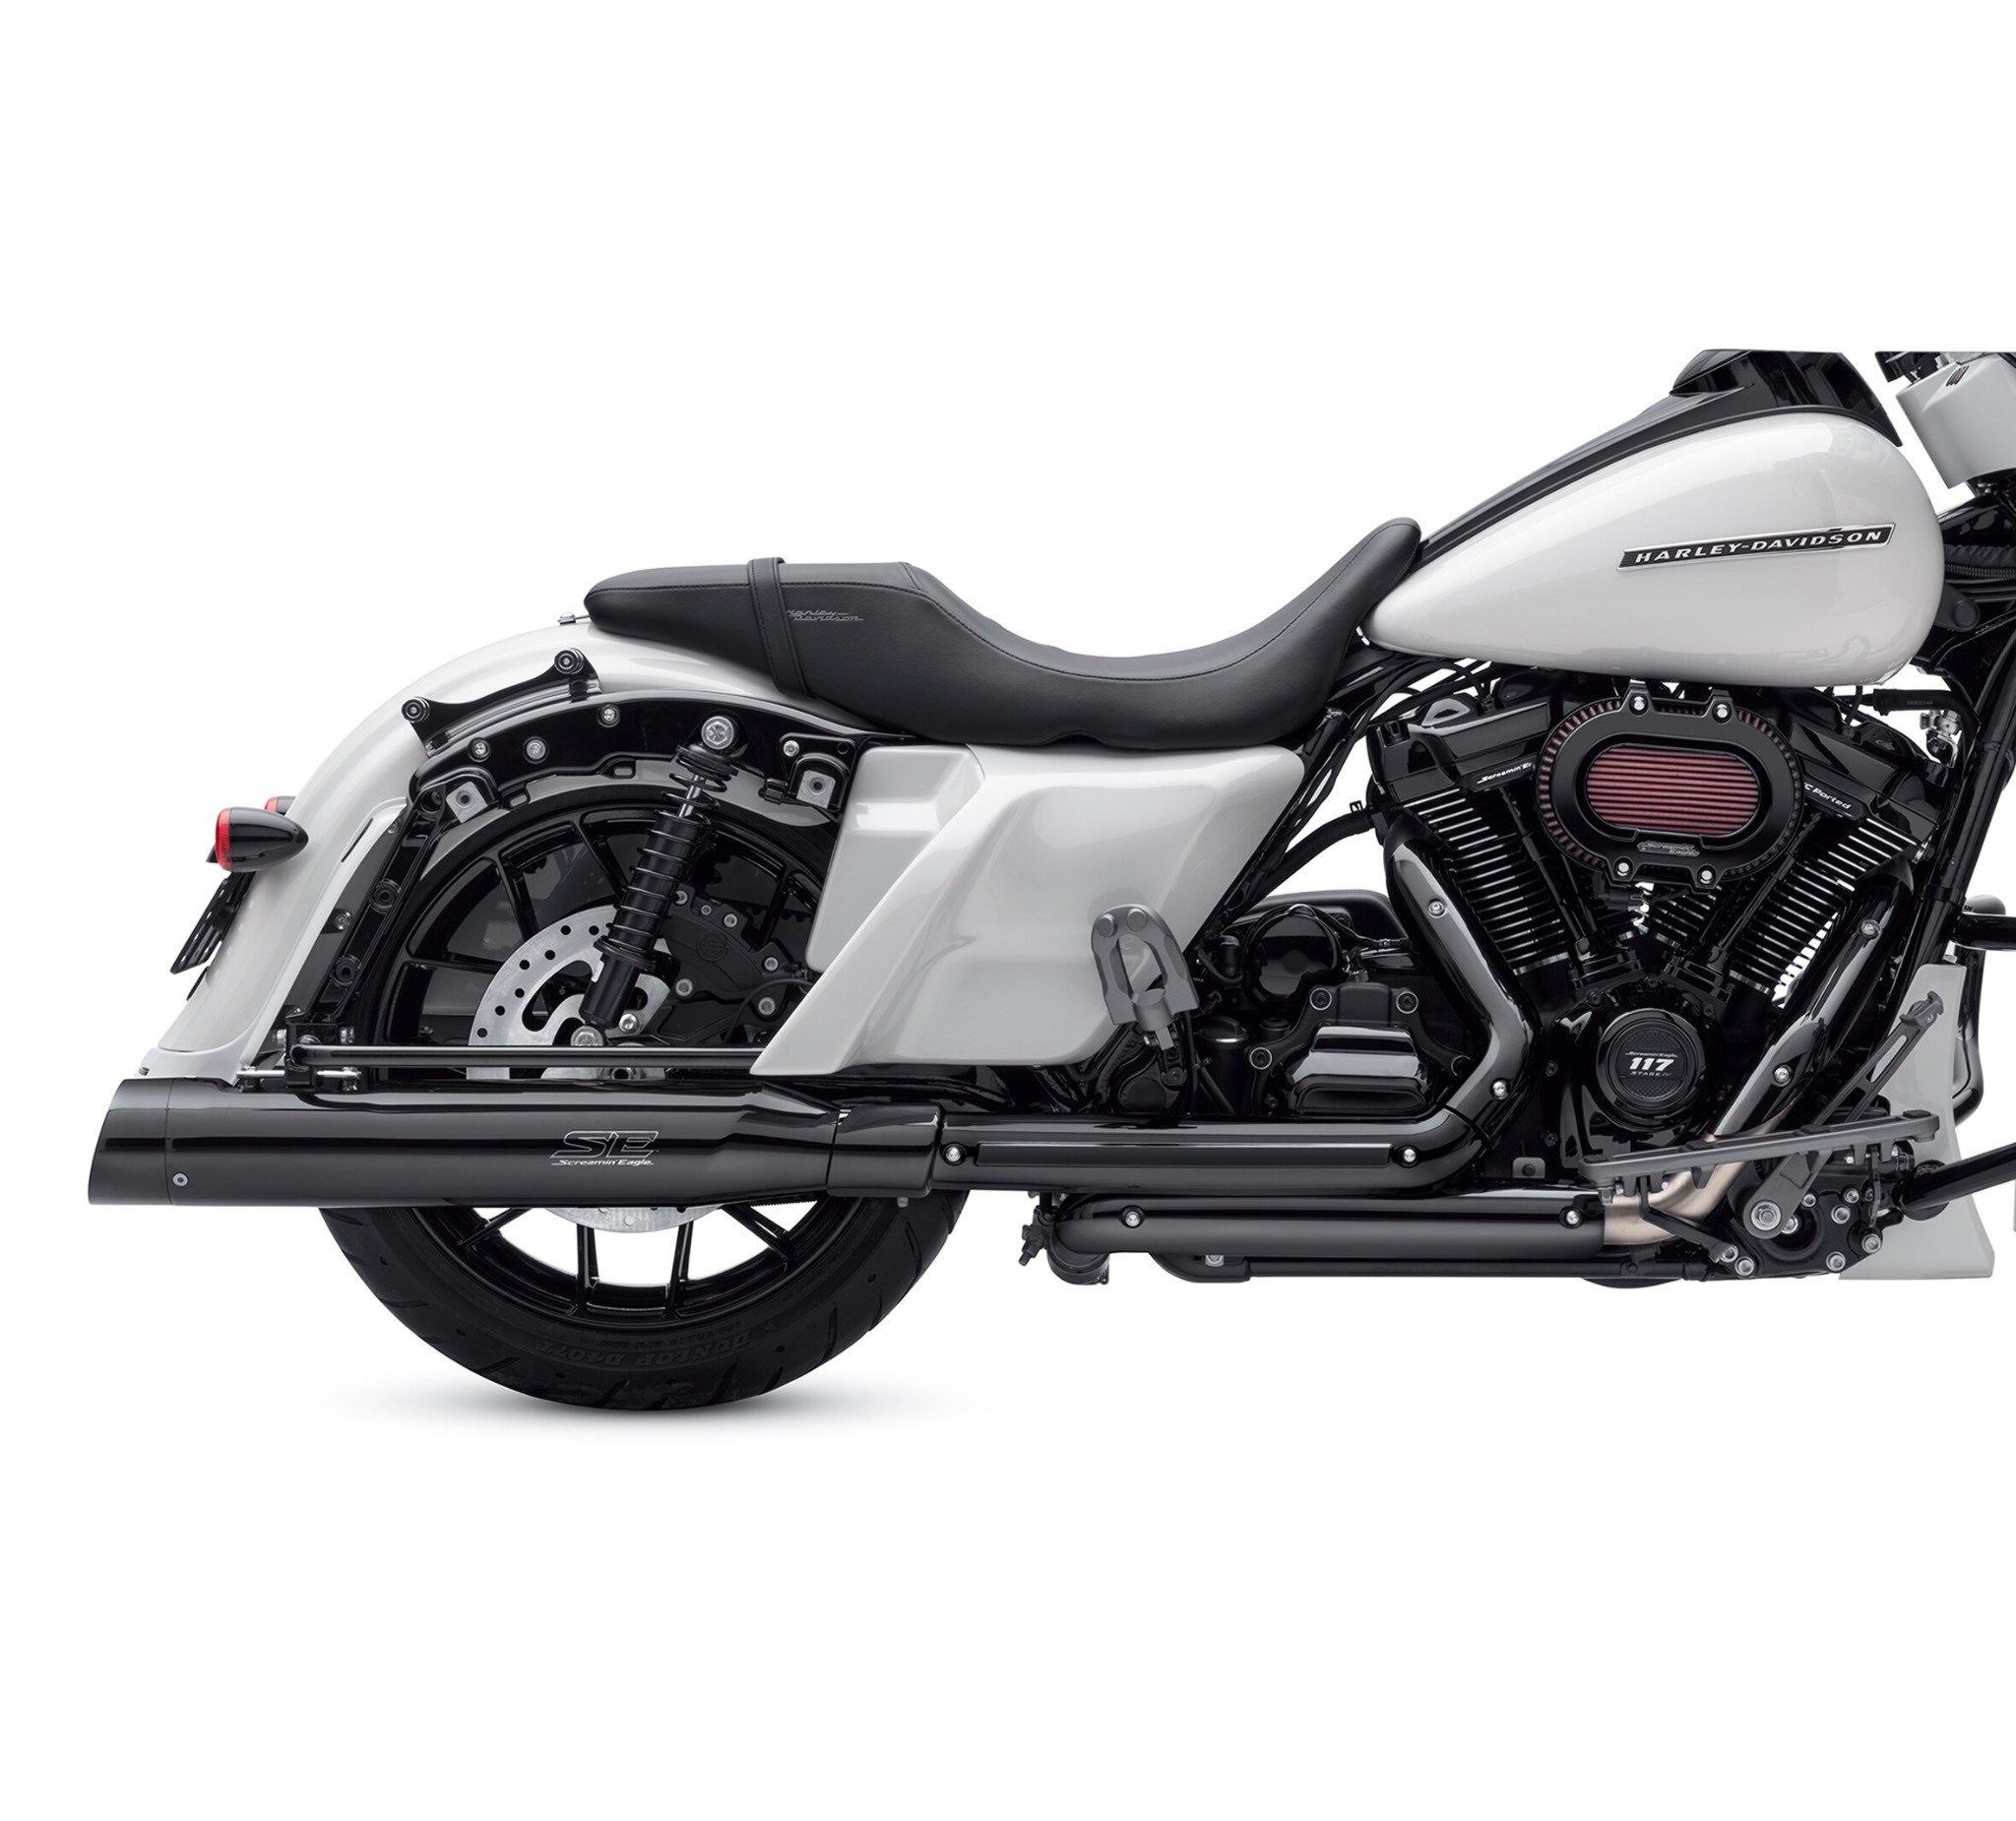 Screamin Eagle High Flow Exhaust System With Street Cannon Mufflers 65600330 Harley Davidson Indonesia